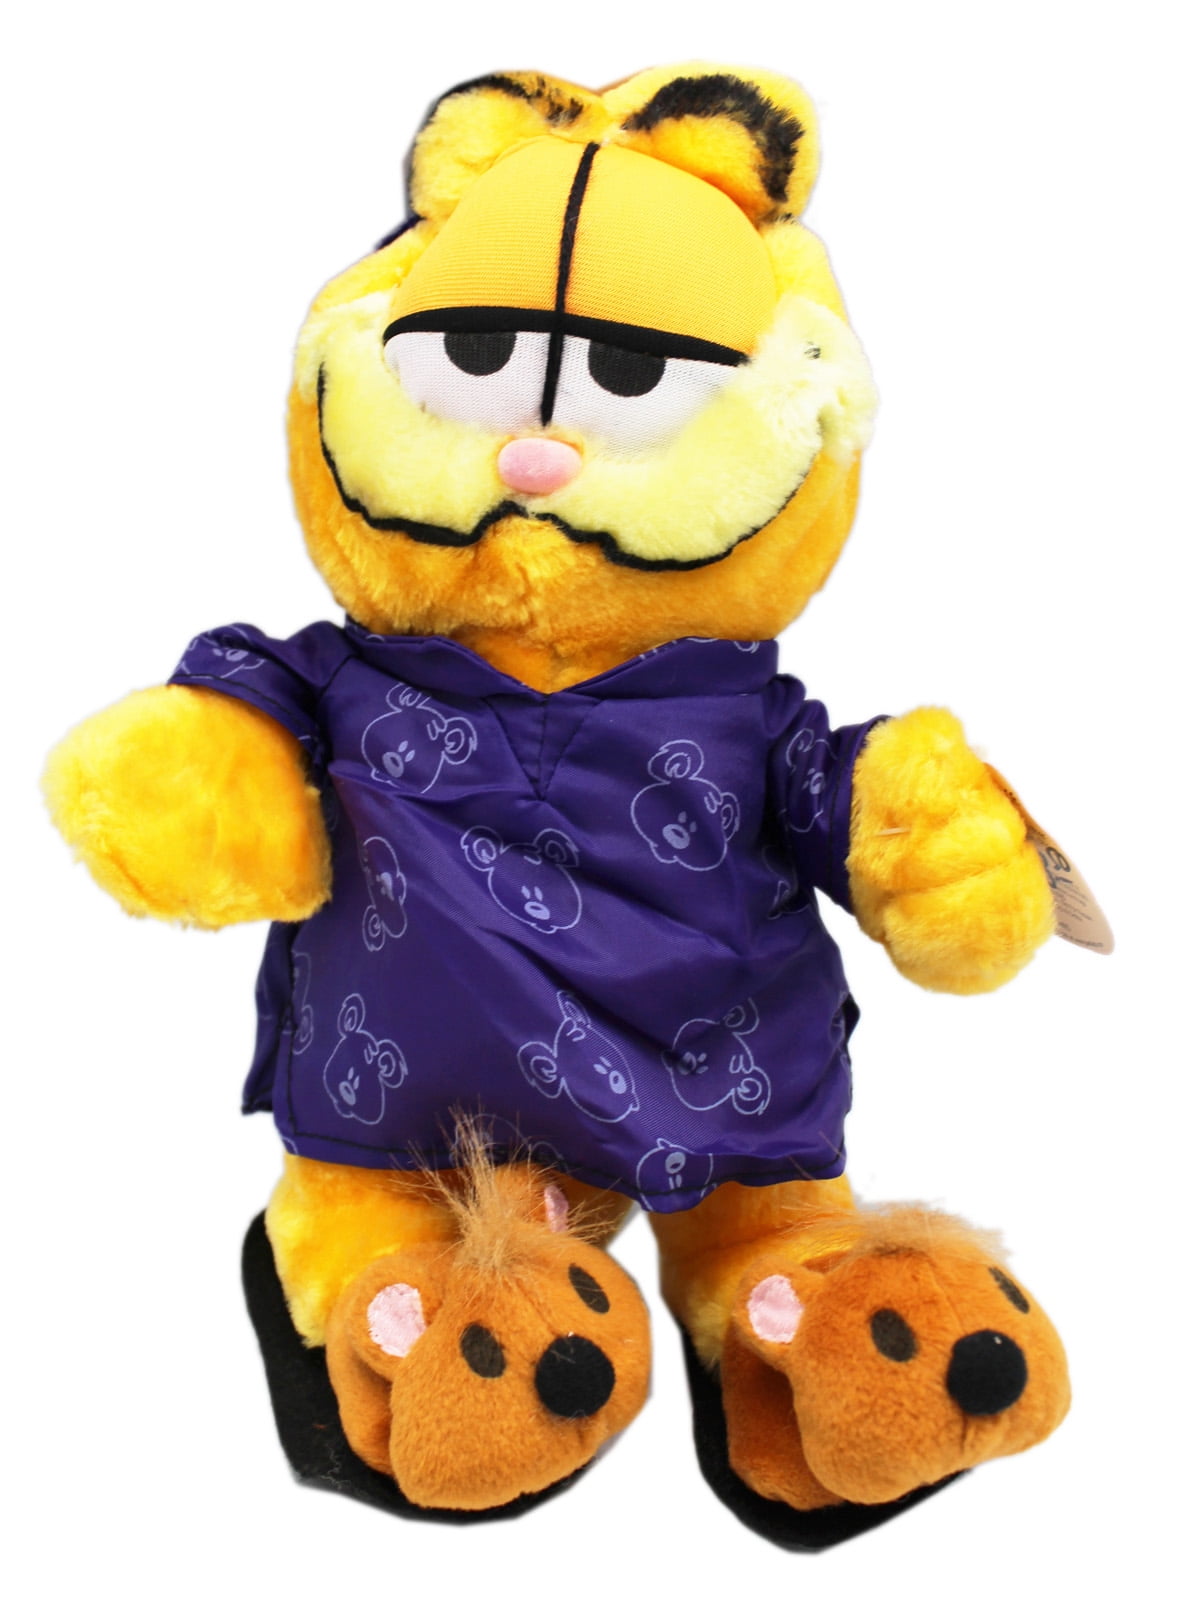 New 4" Synthetic Figure Garfield in pijama with pooky Memo Clip Paws Original 